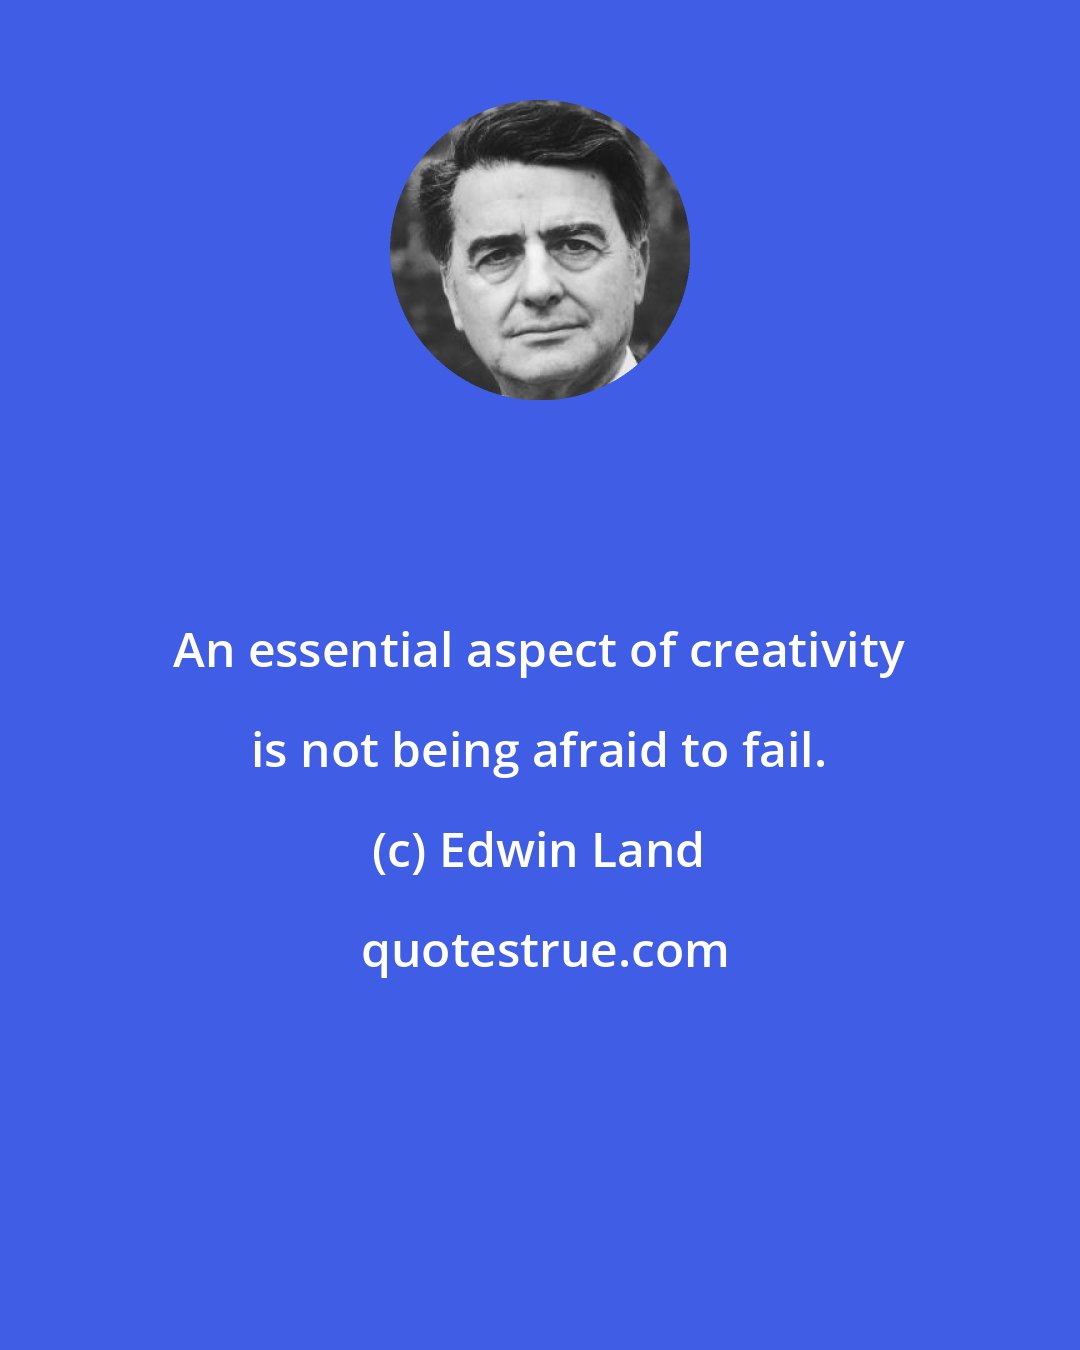 Edwin Land: An essential aspect of creativity is not being afraid to fail.